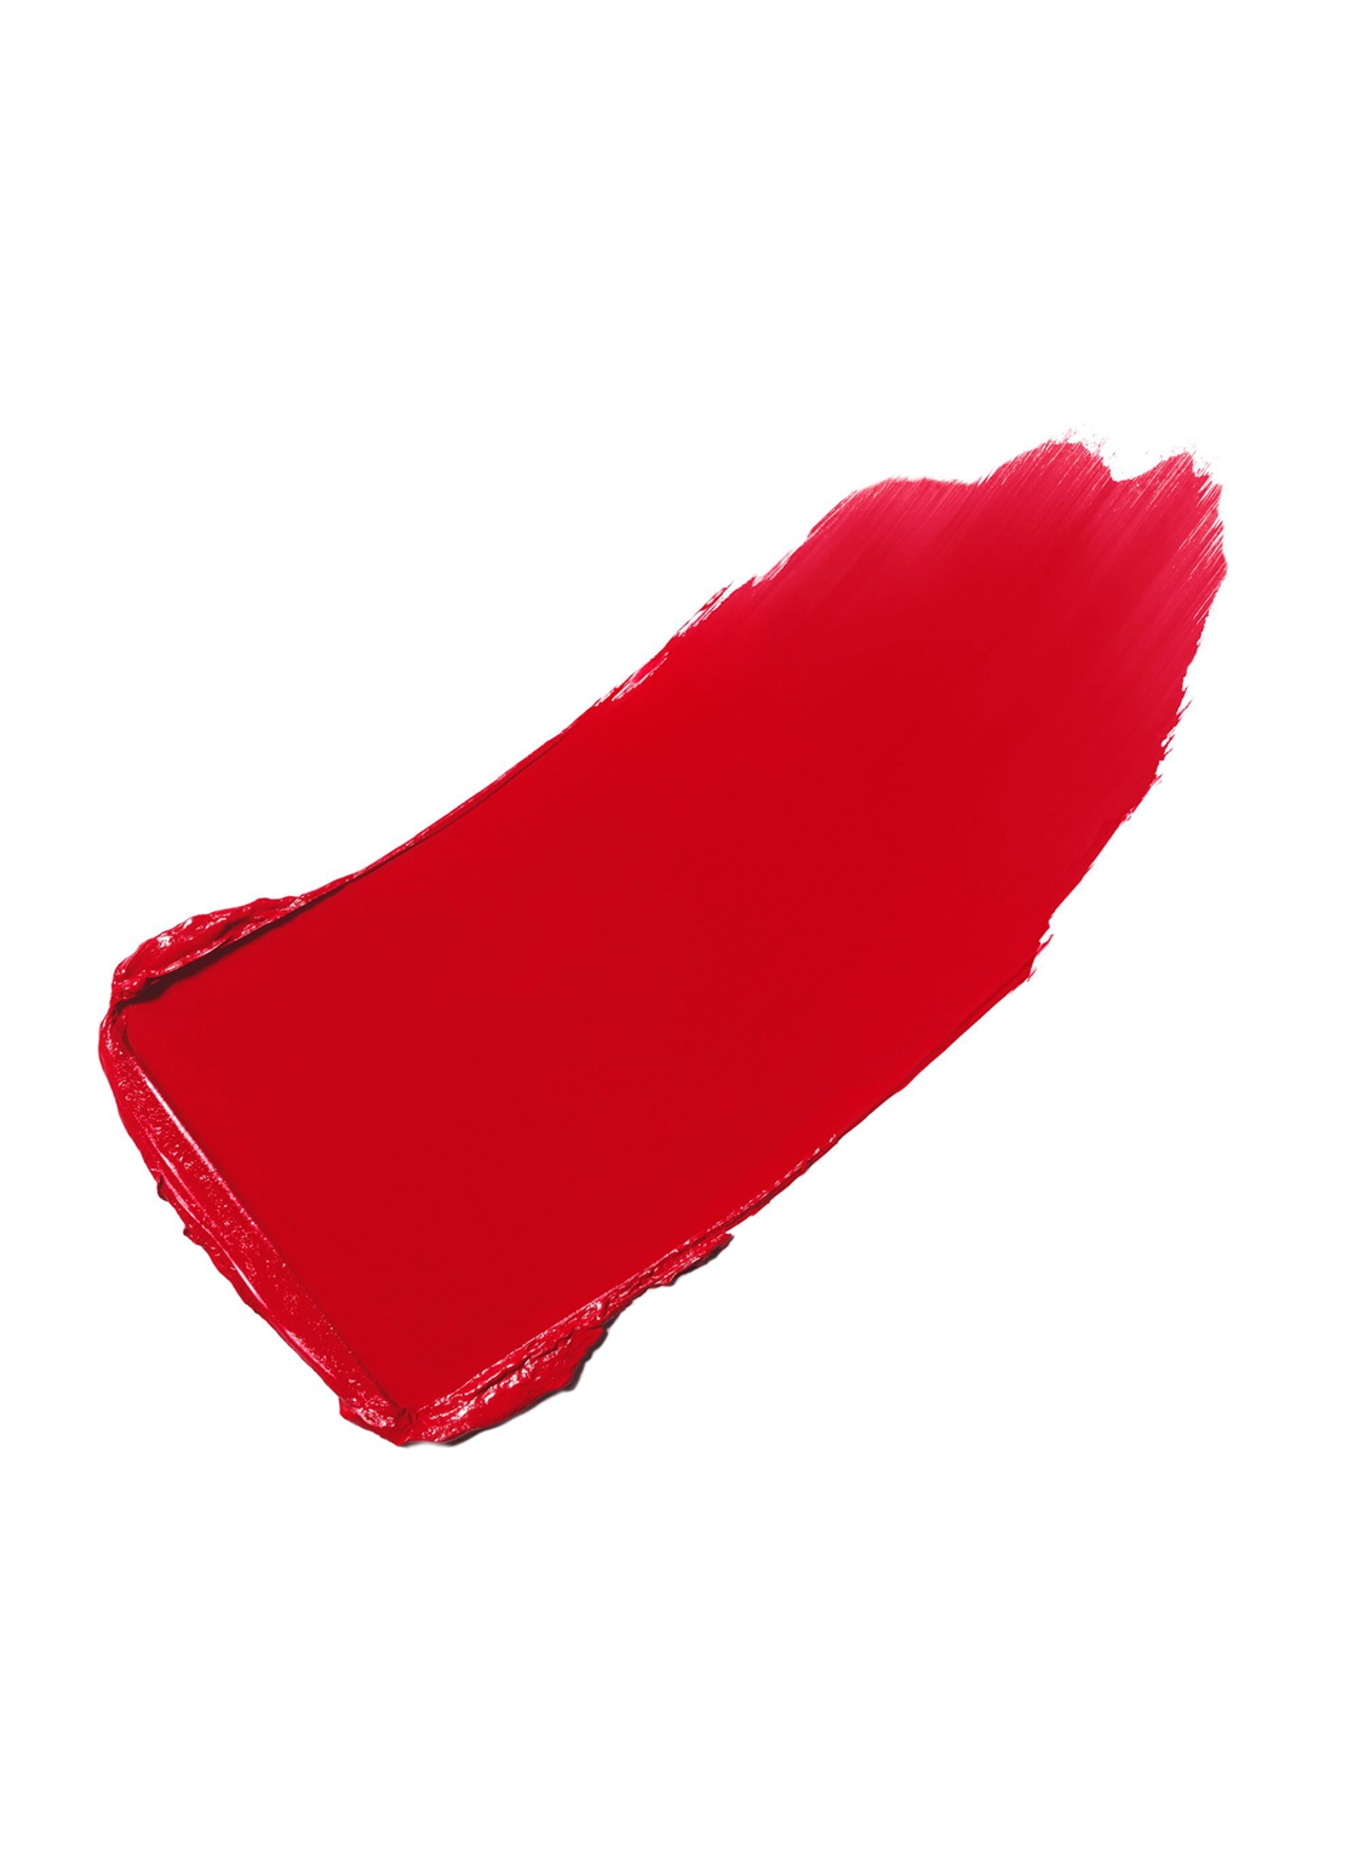 CHANEL ROUGE ALLURE L'EXTRAIT EXKLUSIVKREATION, Farbe: 854 ROUGE PUISSANT (Bild 6)